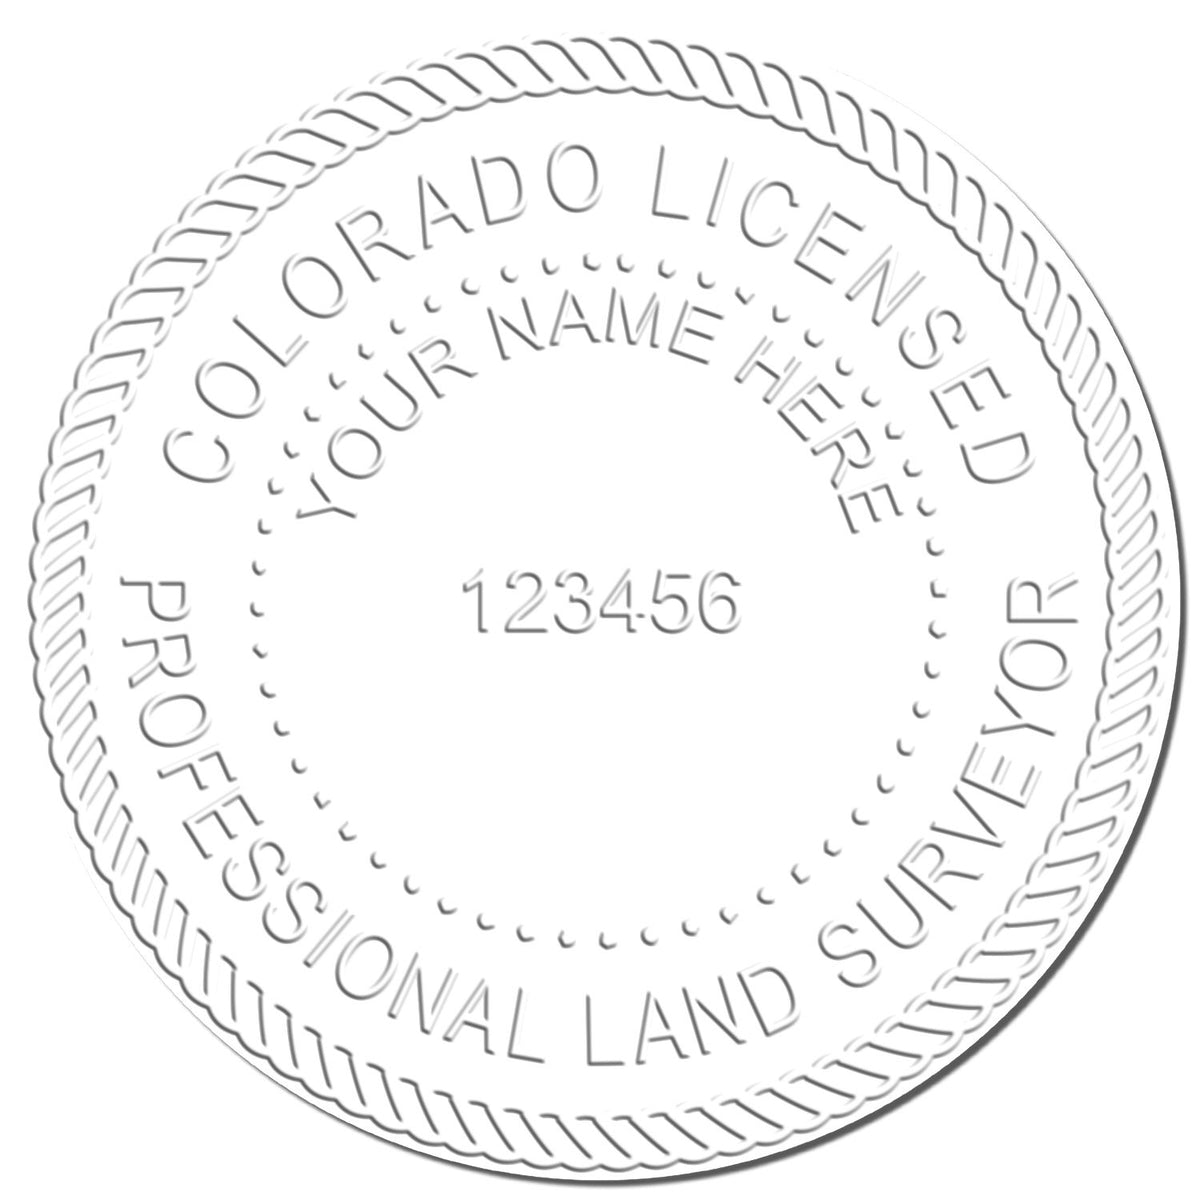 This paper is stamped with a sample imprint of the Colorado Desk Surveyor Seal Embosser, signifying its quality and reliability.